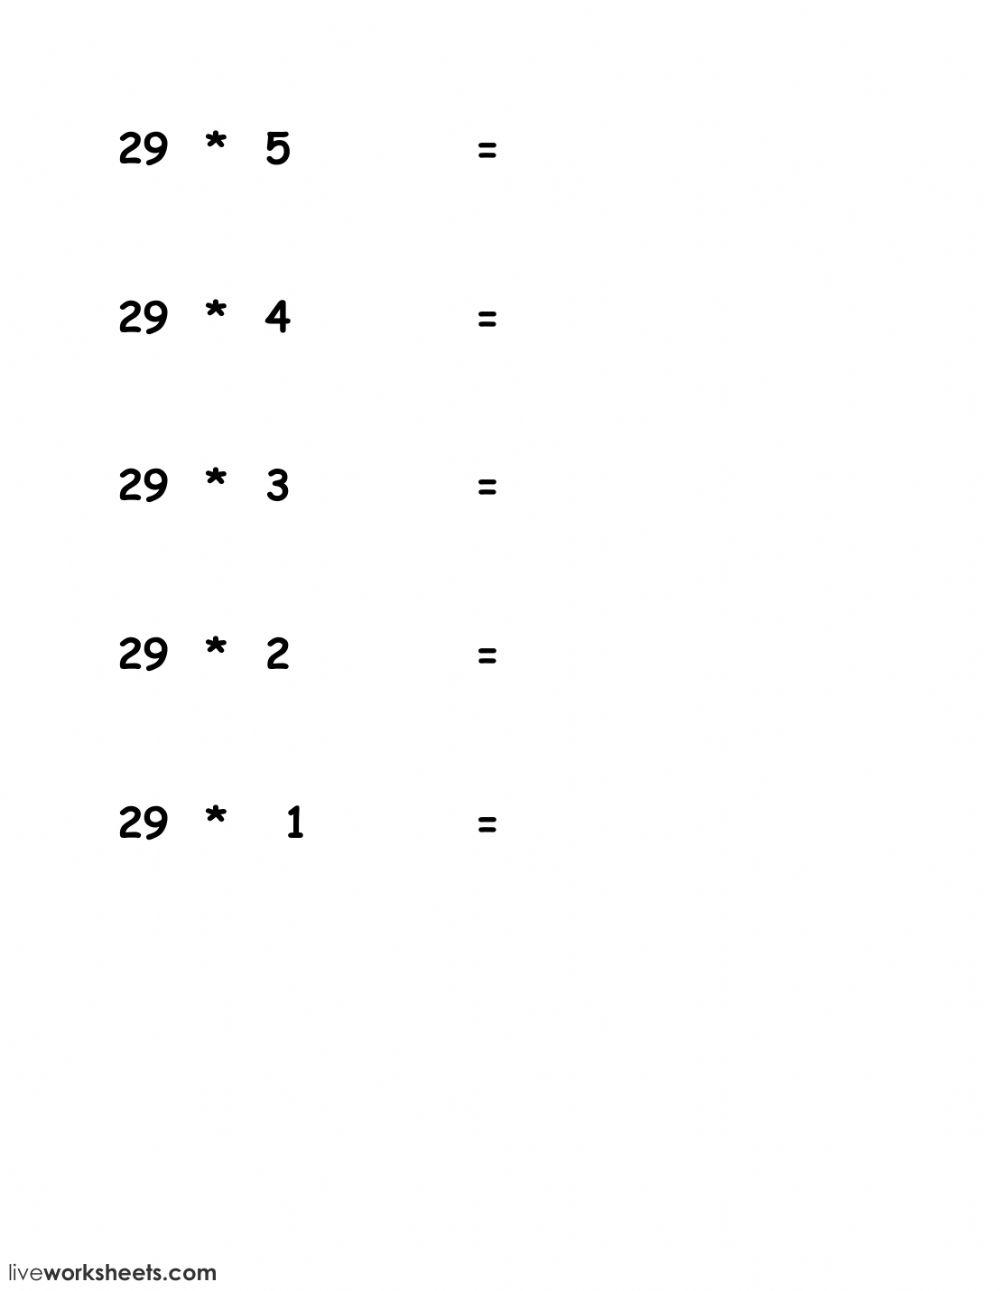 29 times table